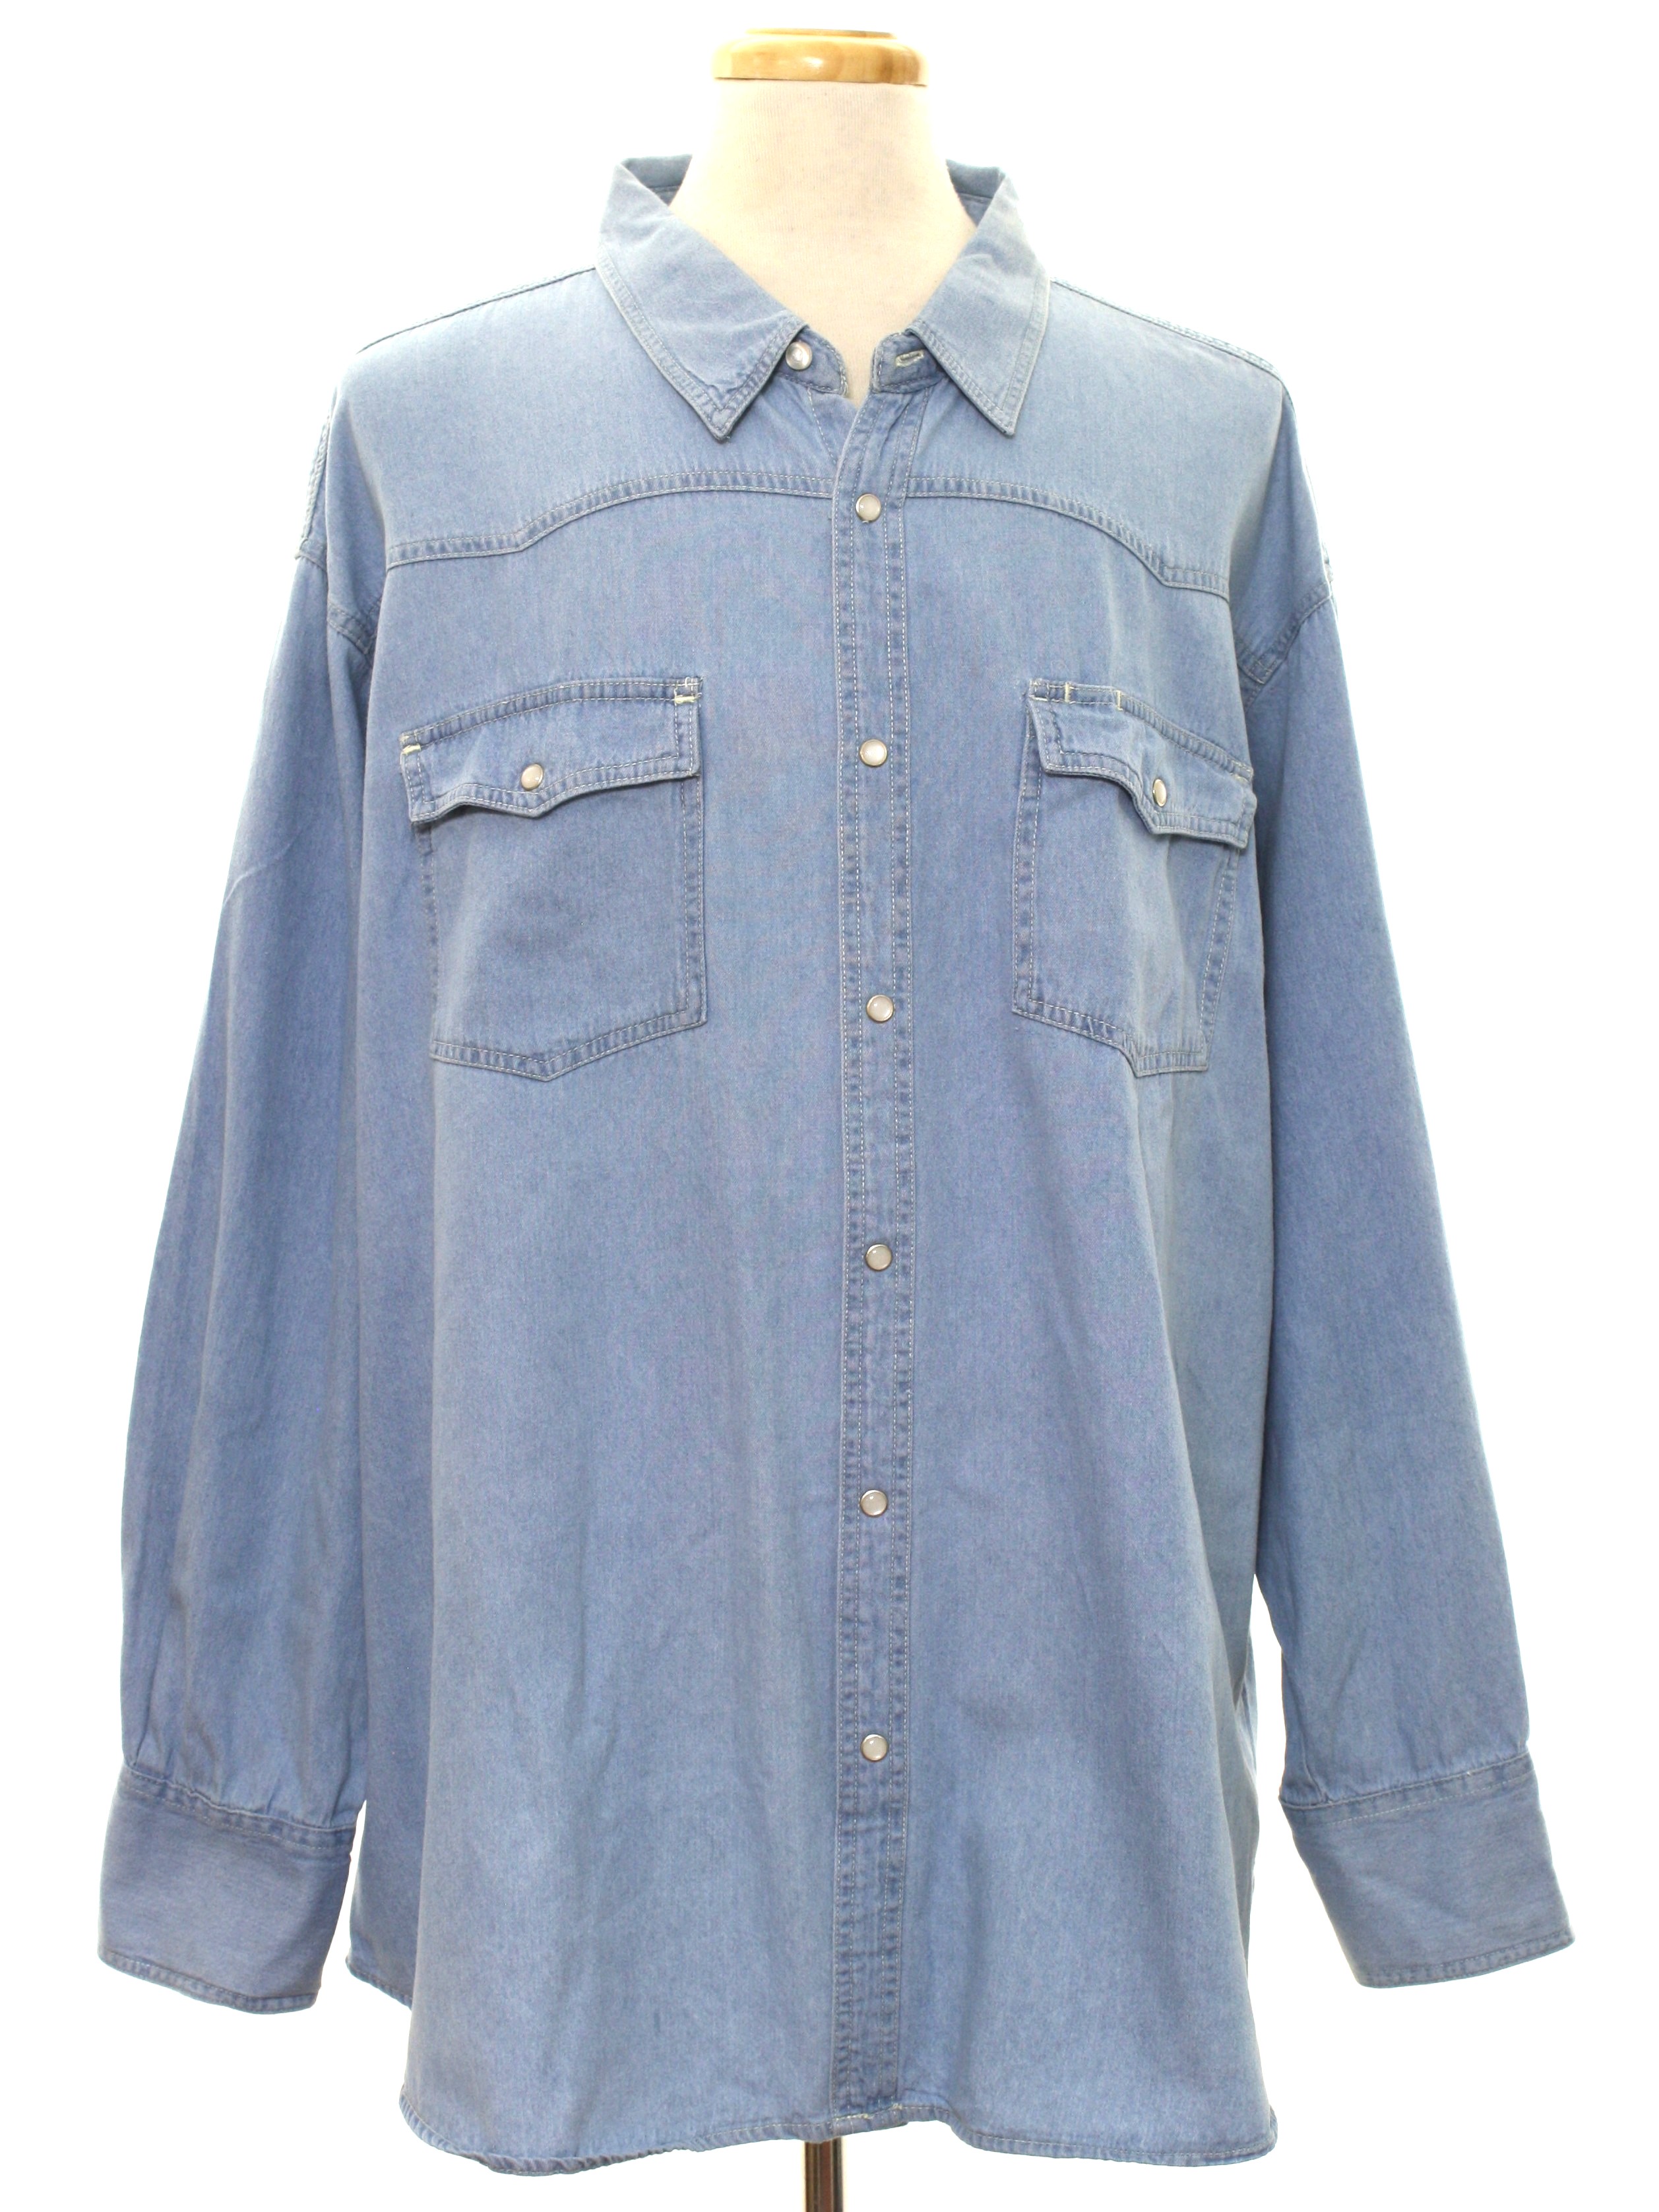 1980s Bit and Bridle Western Shirt: 80s -Bit and Bridle- Mens pale blue ...